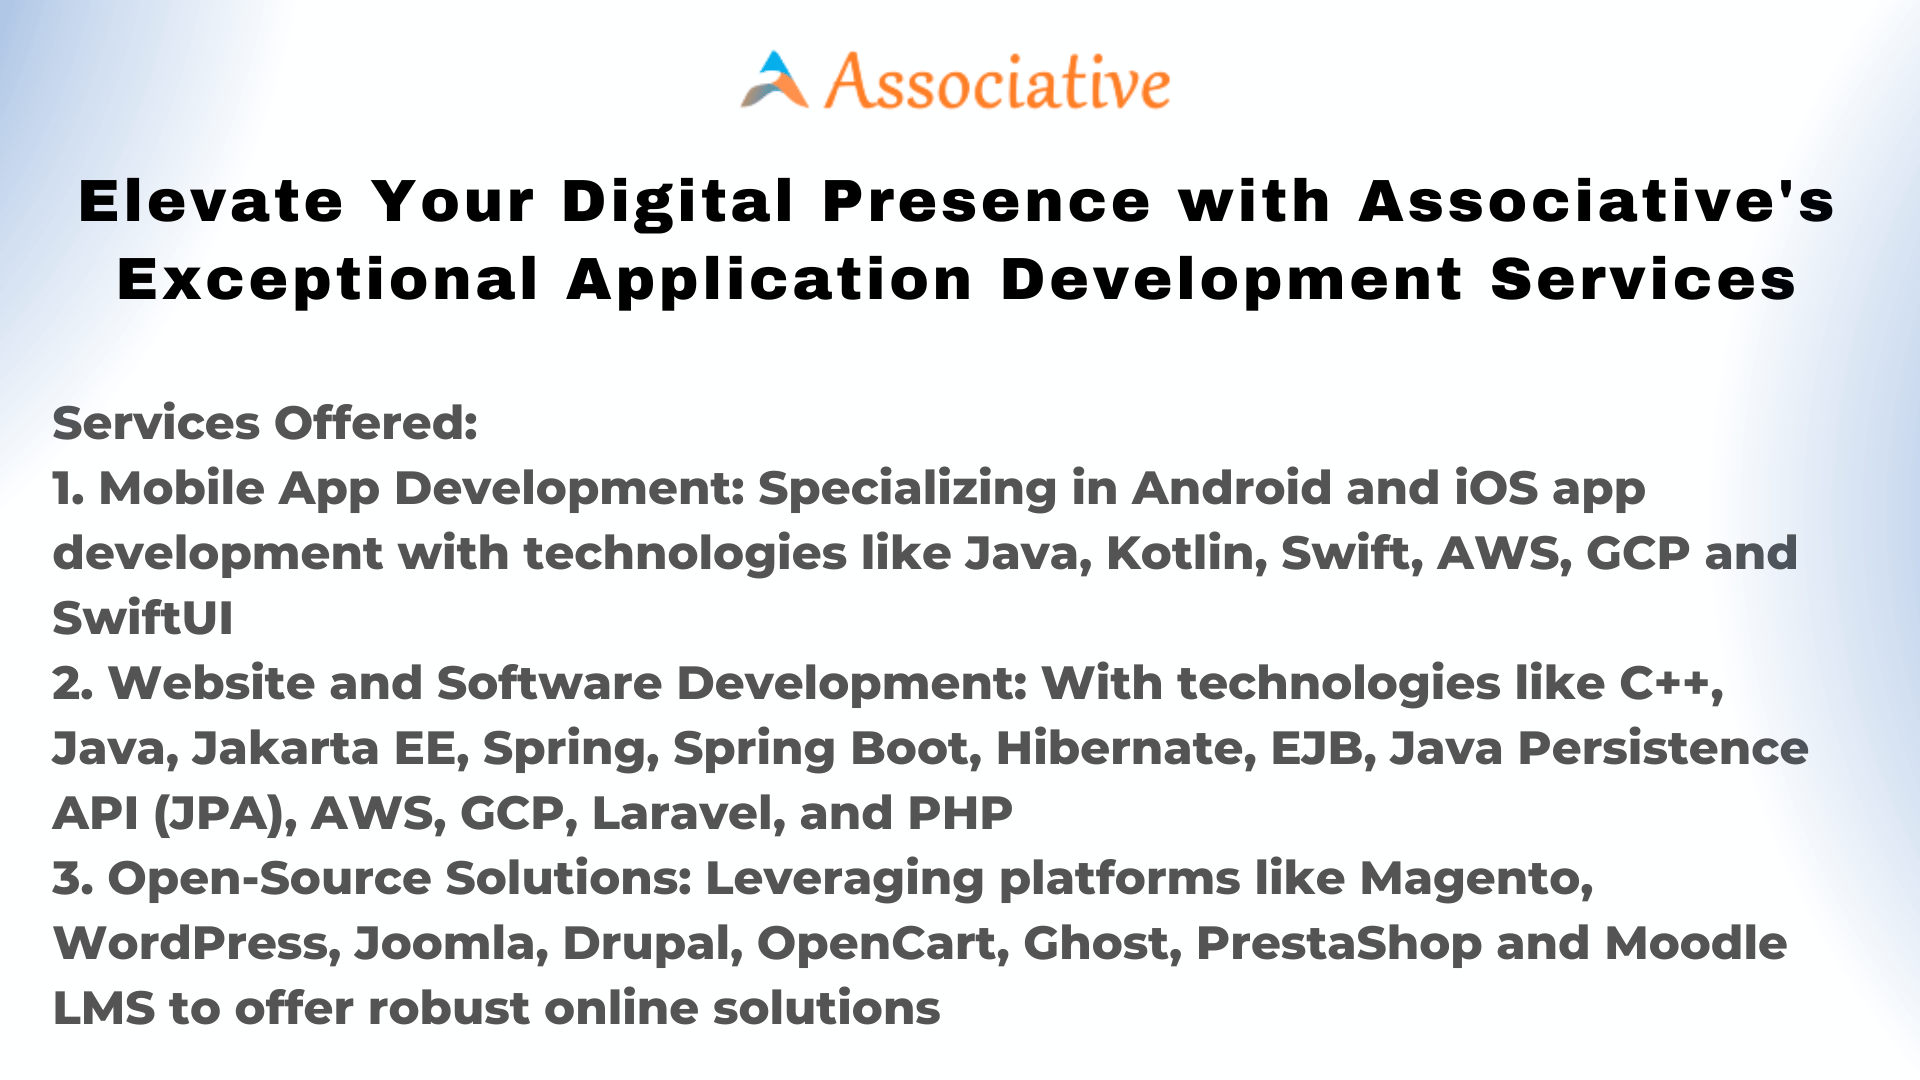 Elevate Your Digital Presence with Associative's Exceptional Application Development Services